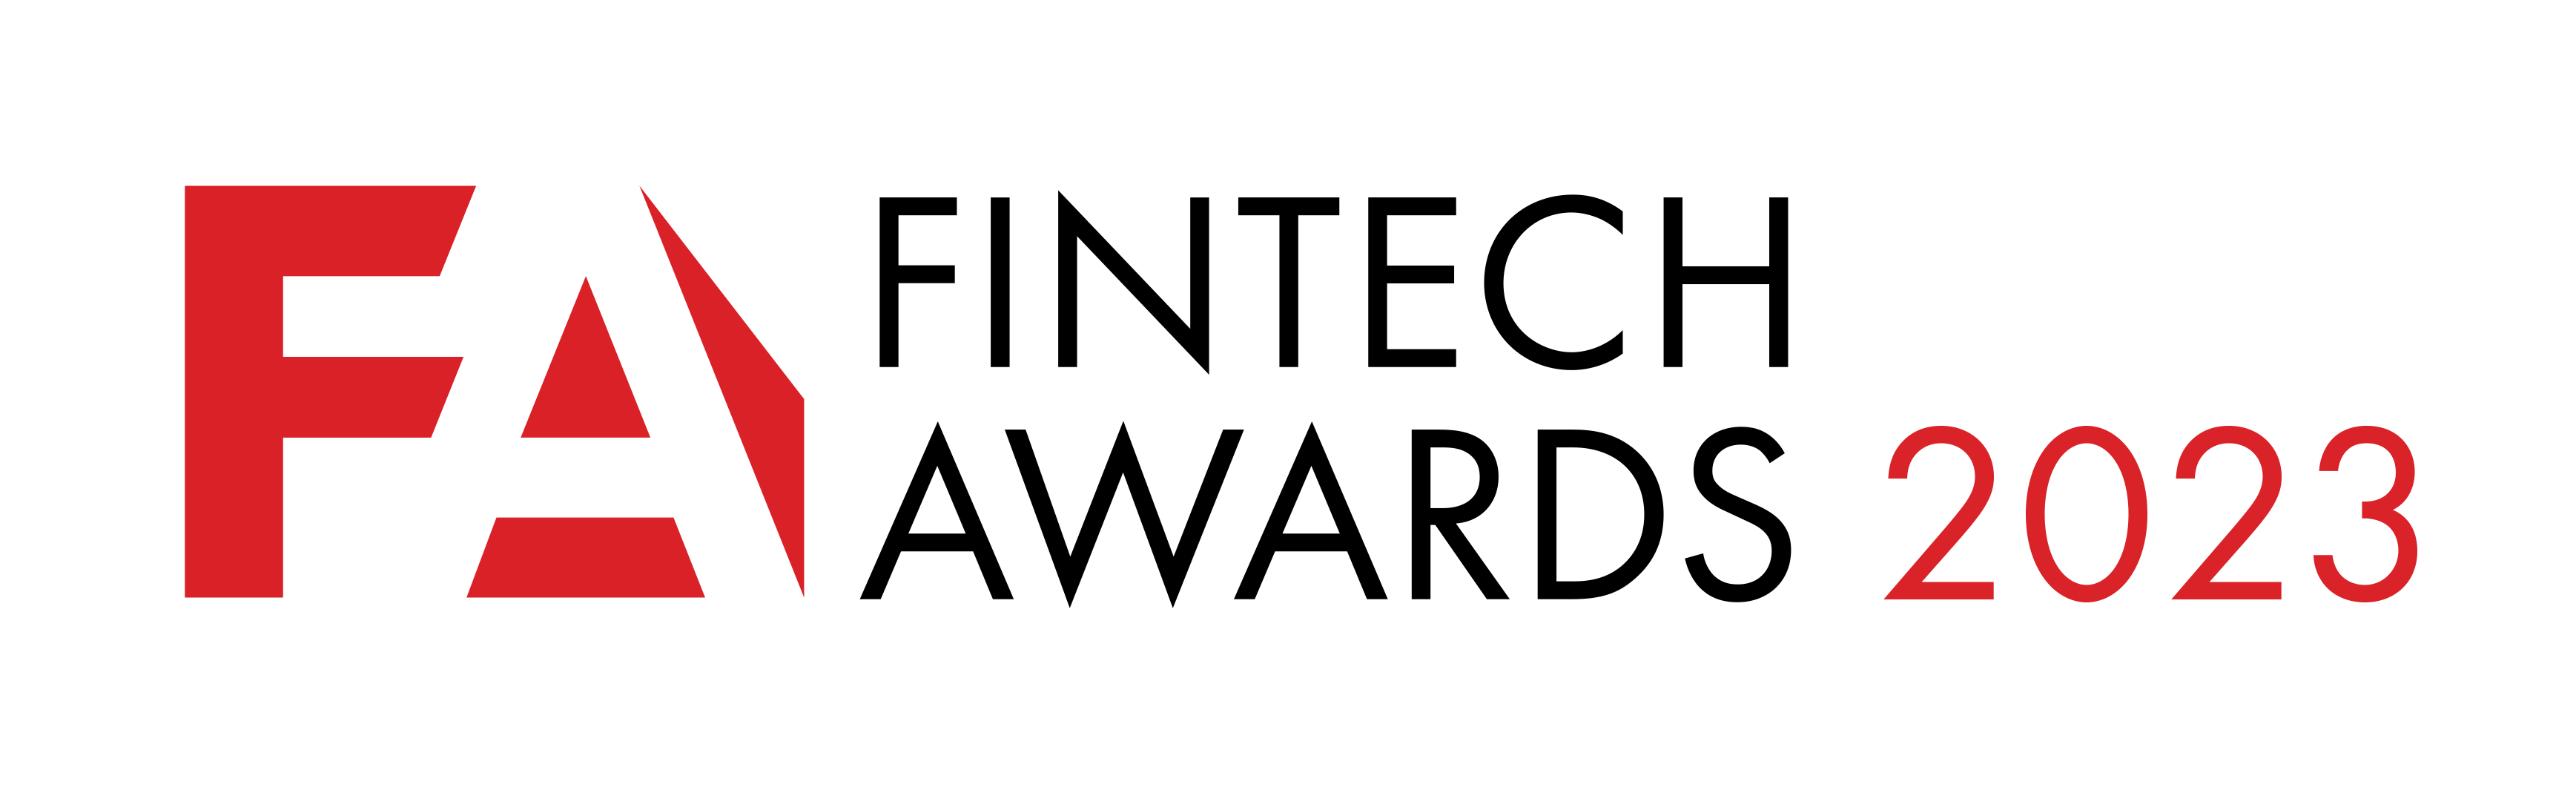 FinTech Awards "Outstanding Innovative SME Banking Services" for<br>2 consecutive years